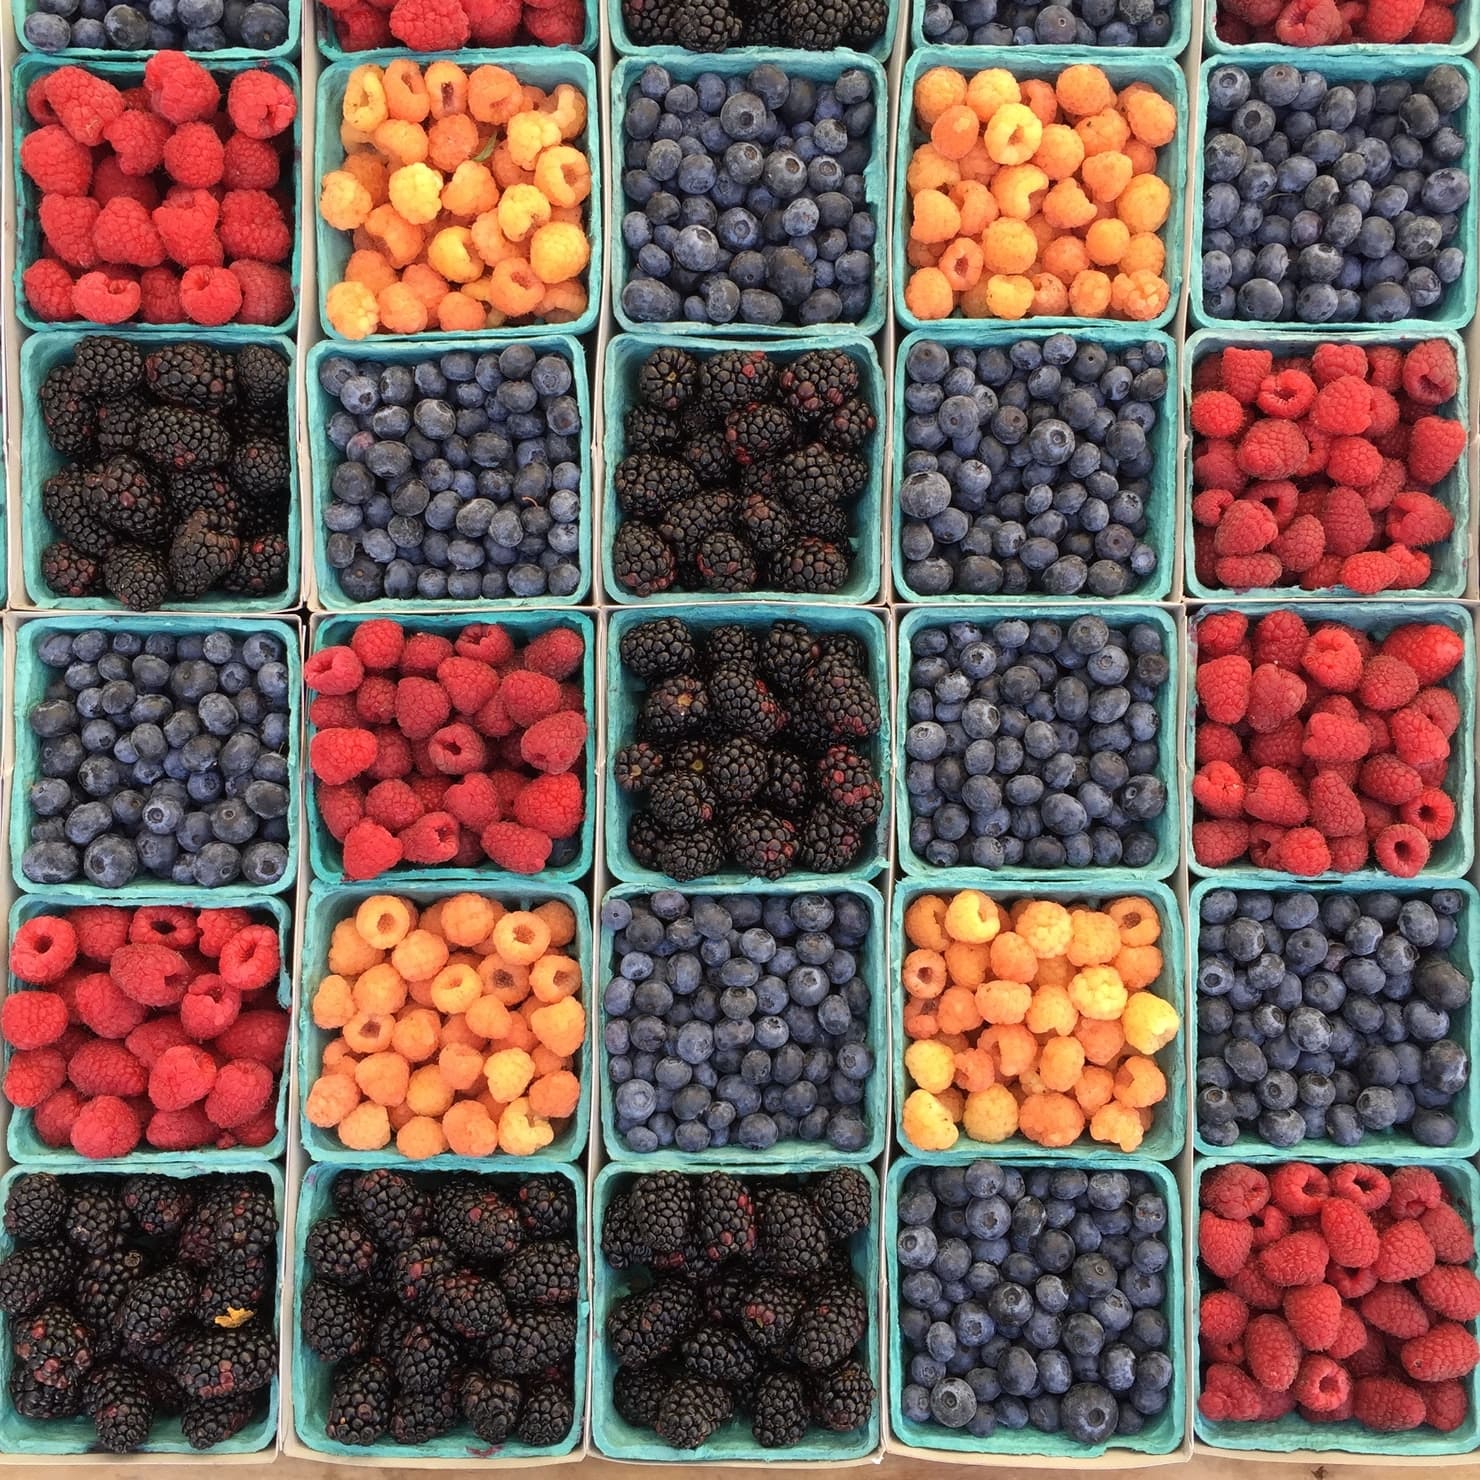 Featured image for “The Bushels of Berries Orchard Package”